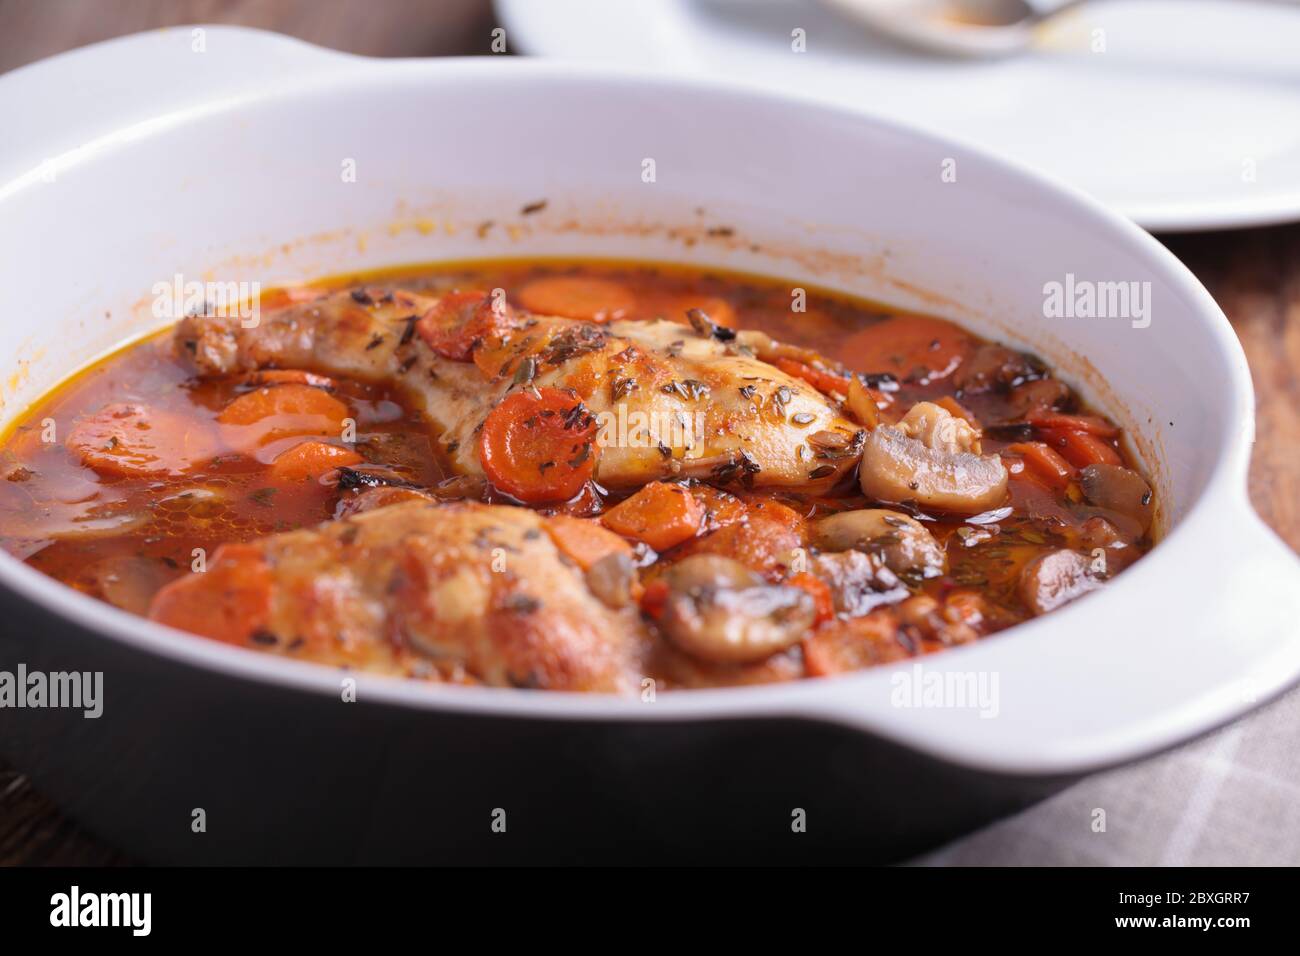 Hunters rabbit stew with carrot in a pan. Closeup view Stock Photo